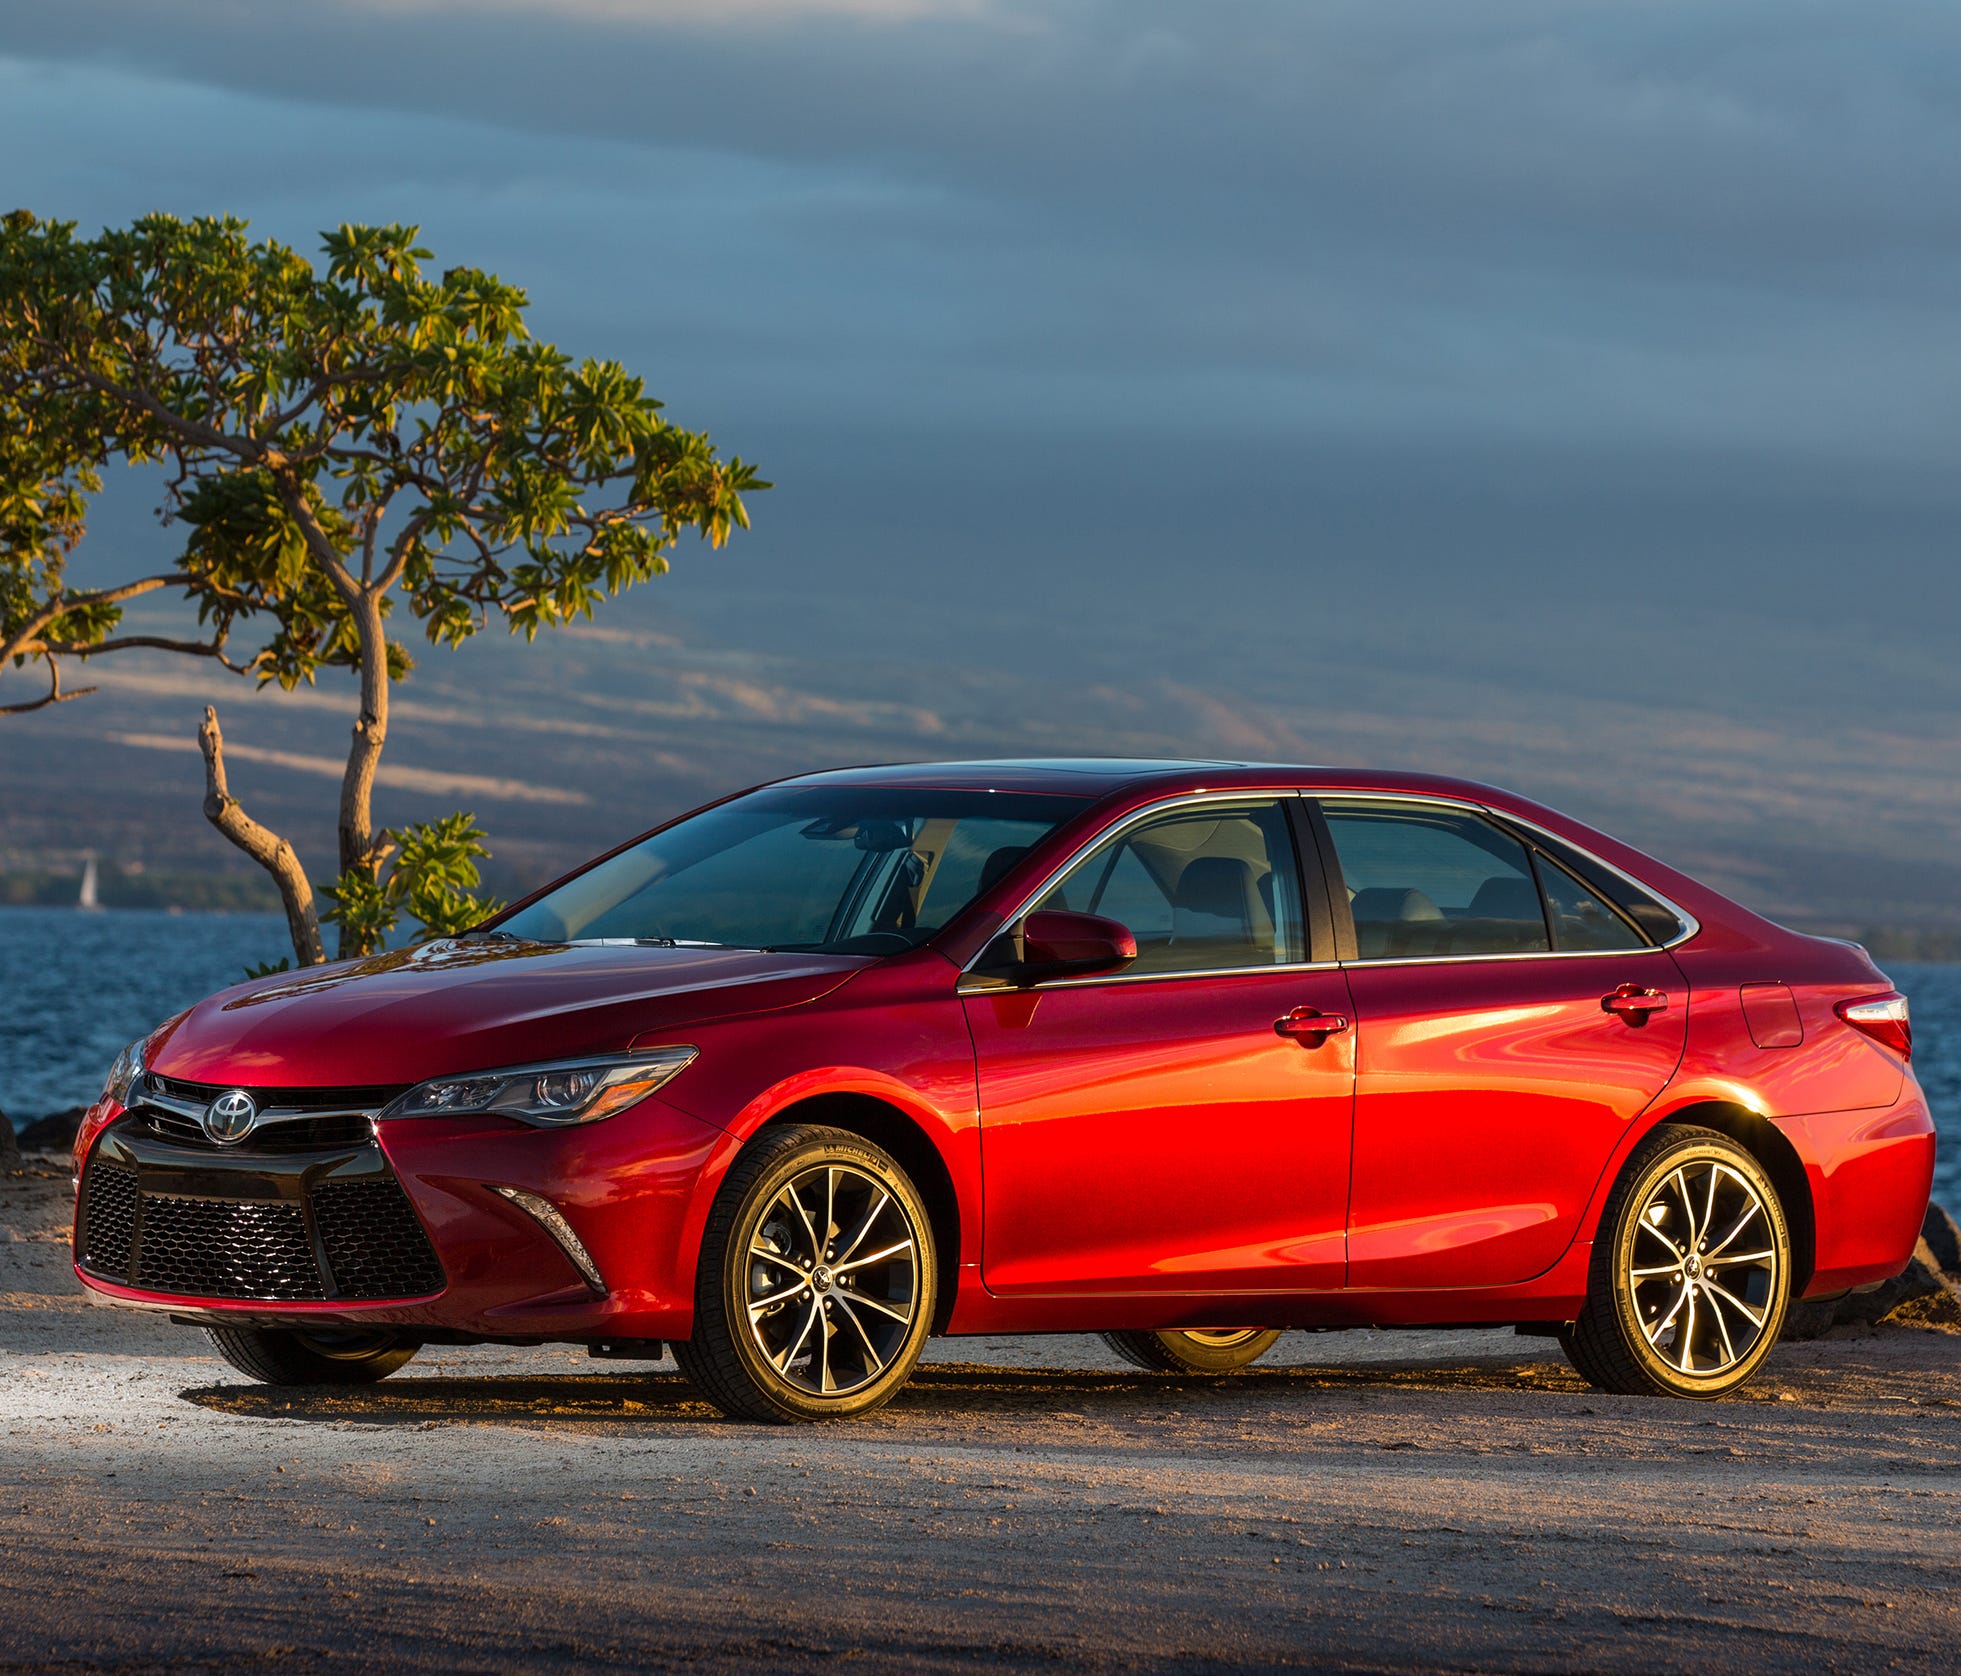 This photo provided by Toyota shows the 2017 Toyota Camry.. (David Dewhurst Photography/Courtesy of Toyota Motor Sales, USA., Inc. via AP)